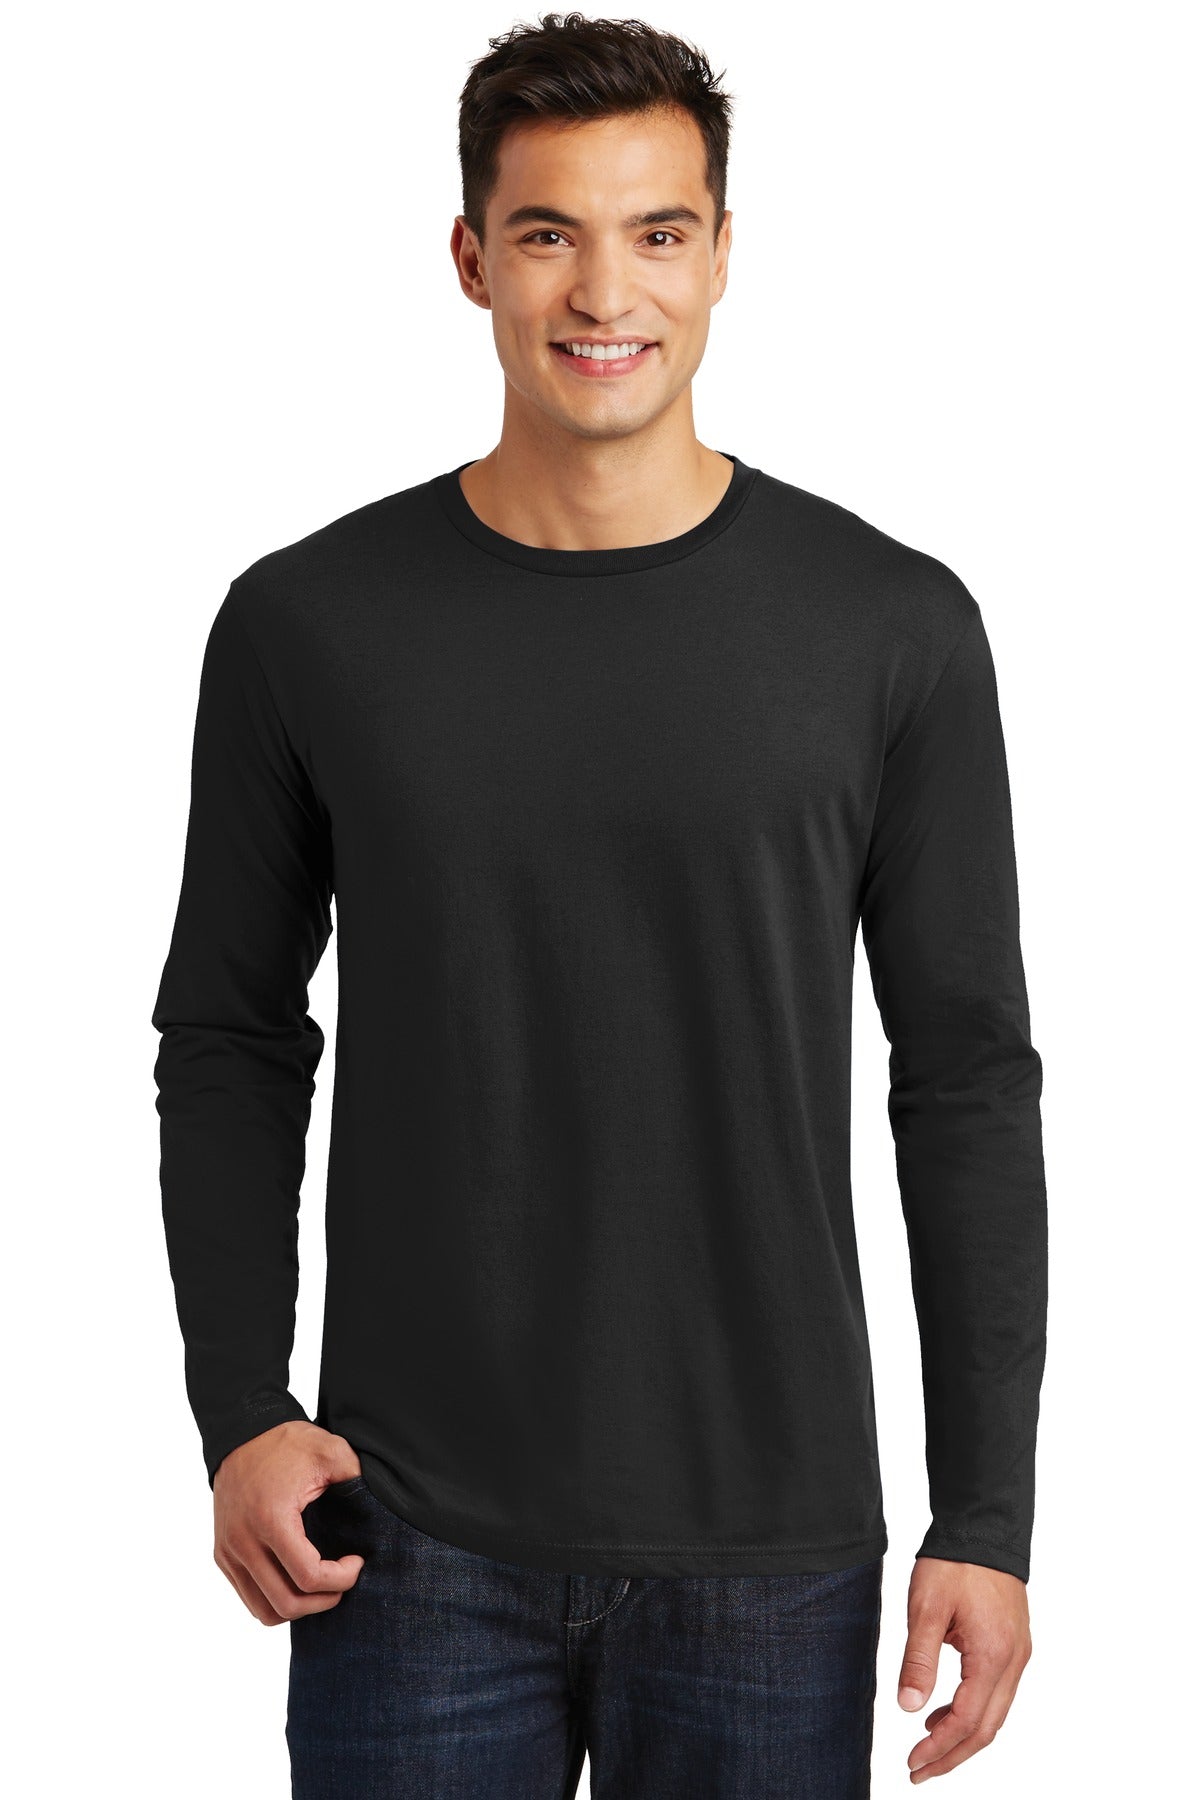 District ® Perfect Weight® Long Sleeve Tee. DT105 - DFW Impression